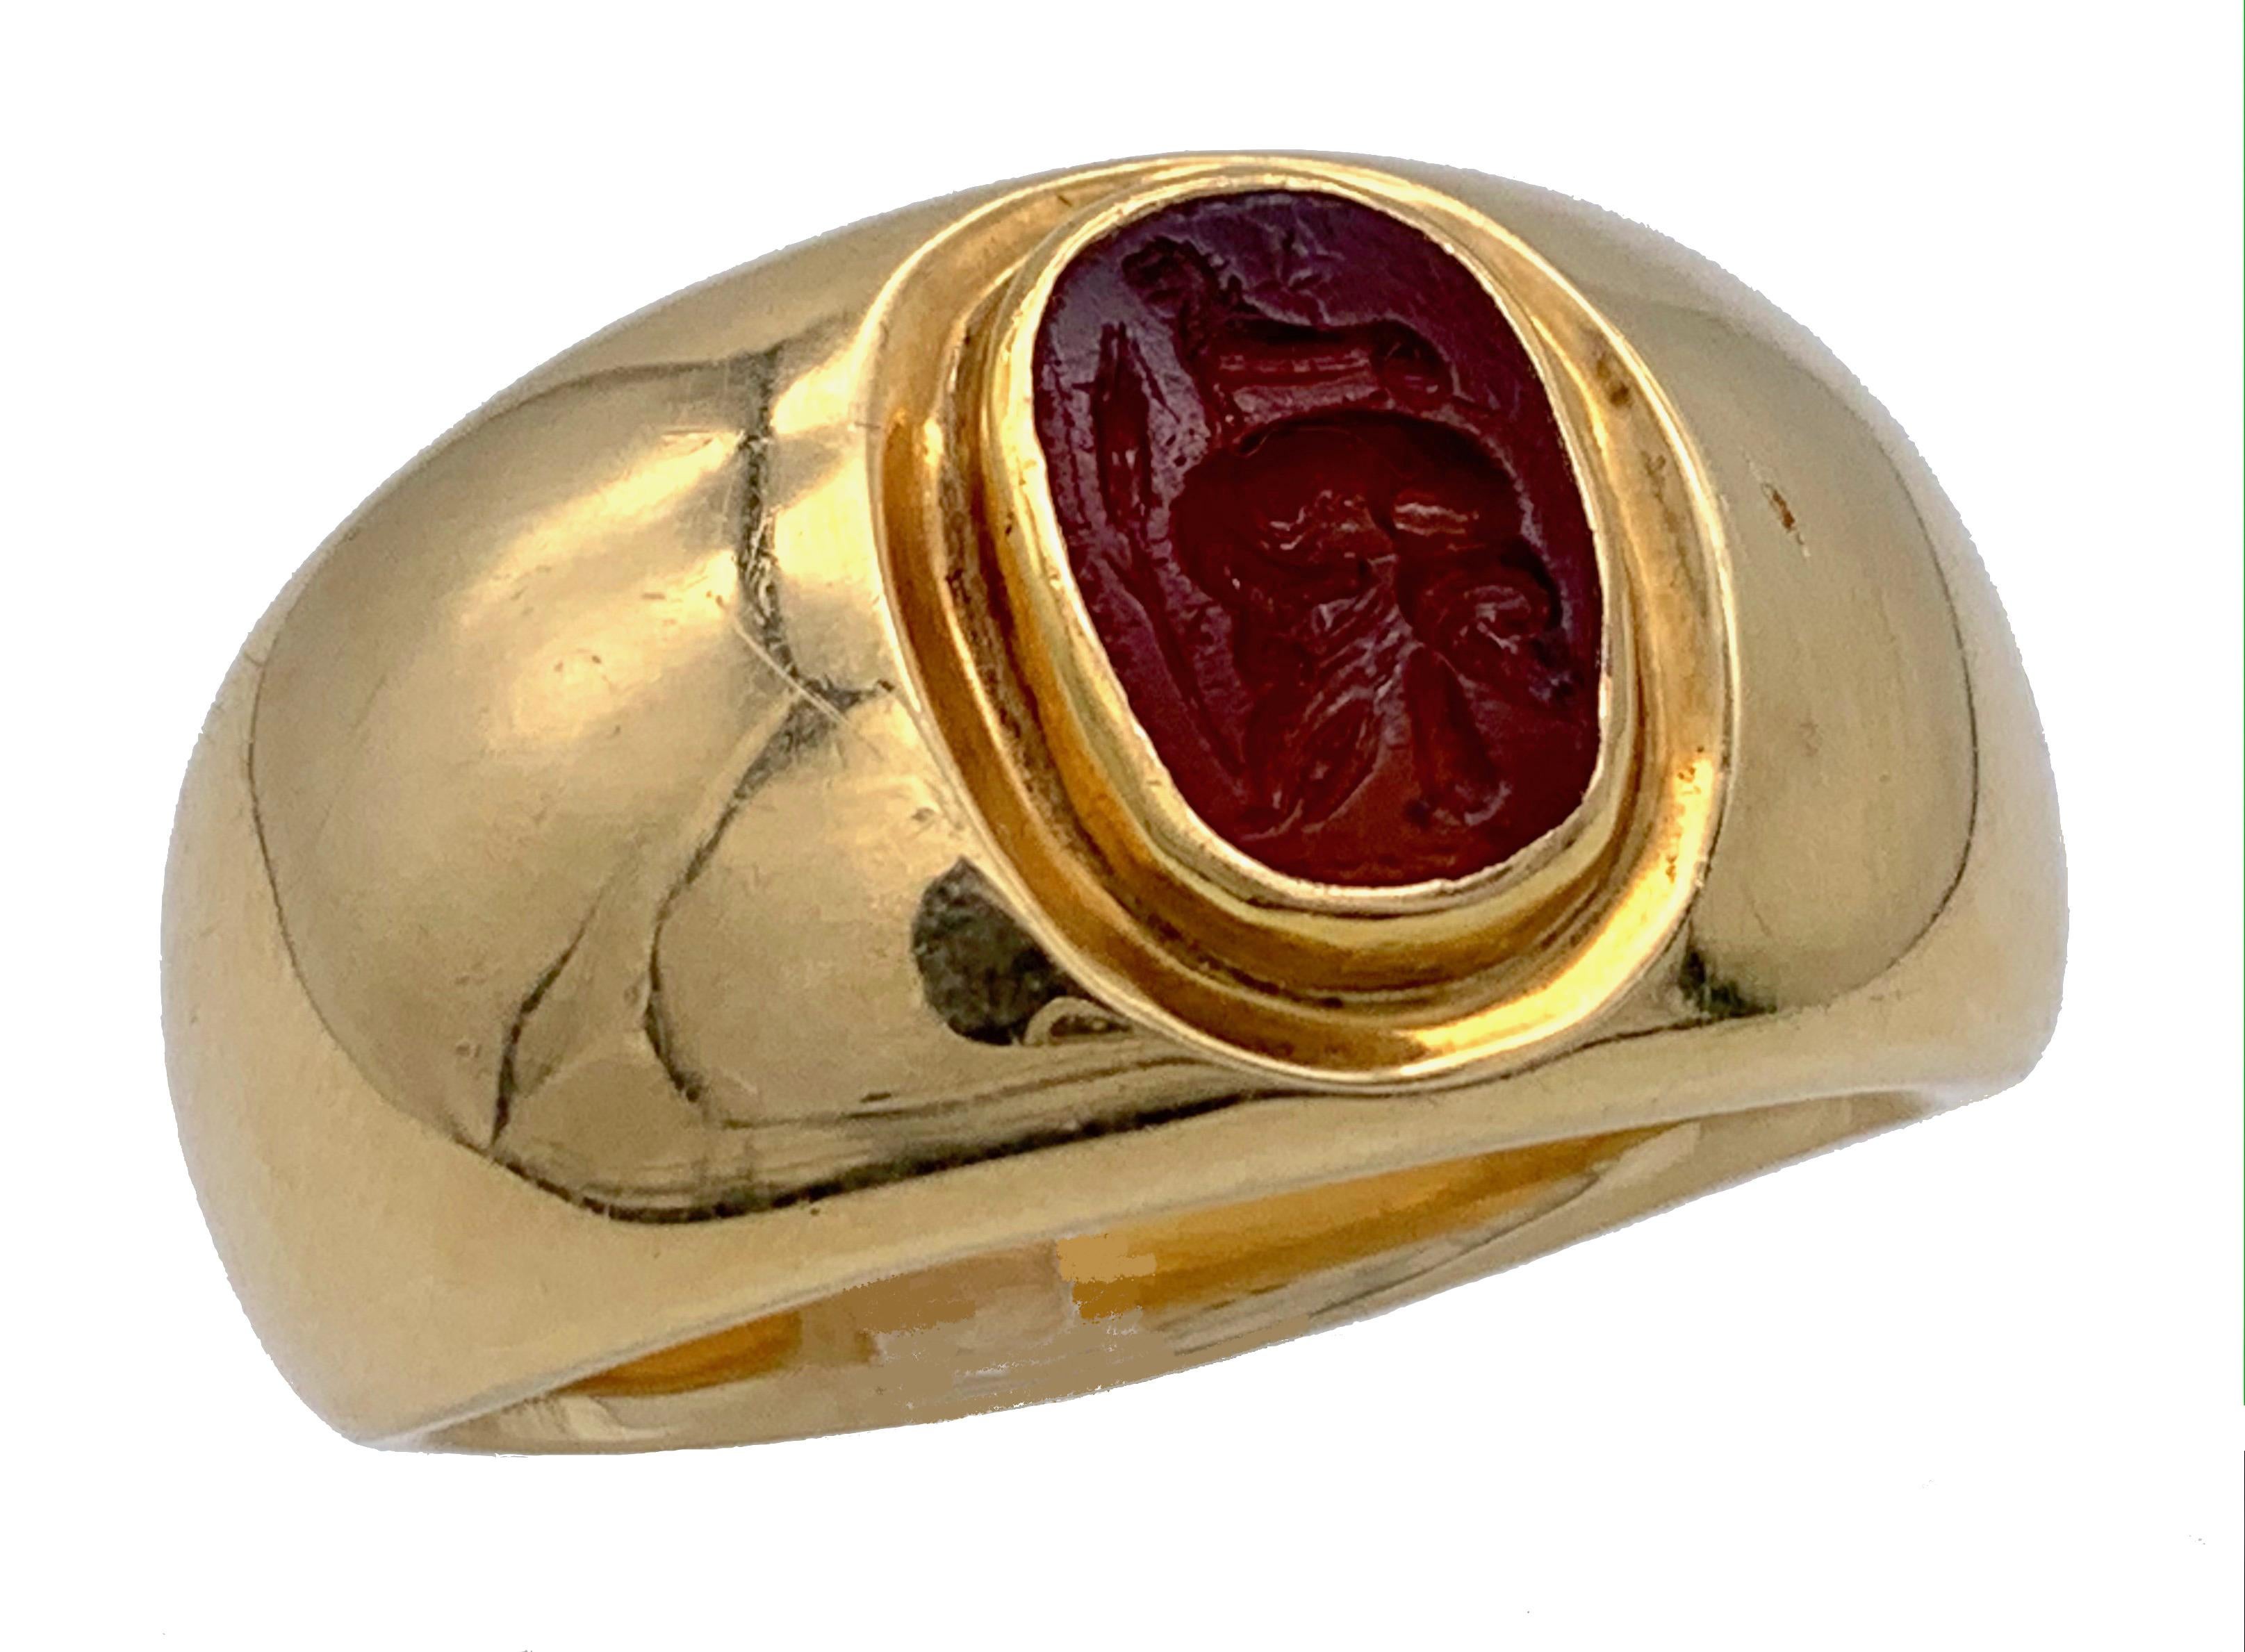 Stunning and massive 15 karat gold gentleman's ring with an exquisitely mounted oval agate intaglio carving depicting a butterfly, a lion, an ear and a helmet. The gem dates from the republican period around the year zero.
ringsize 12 - X